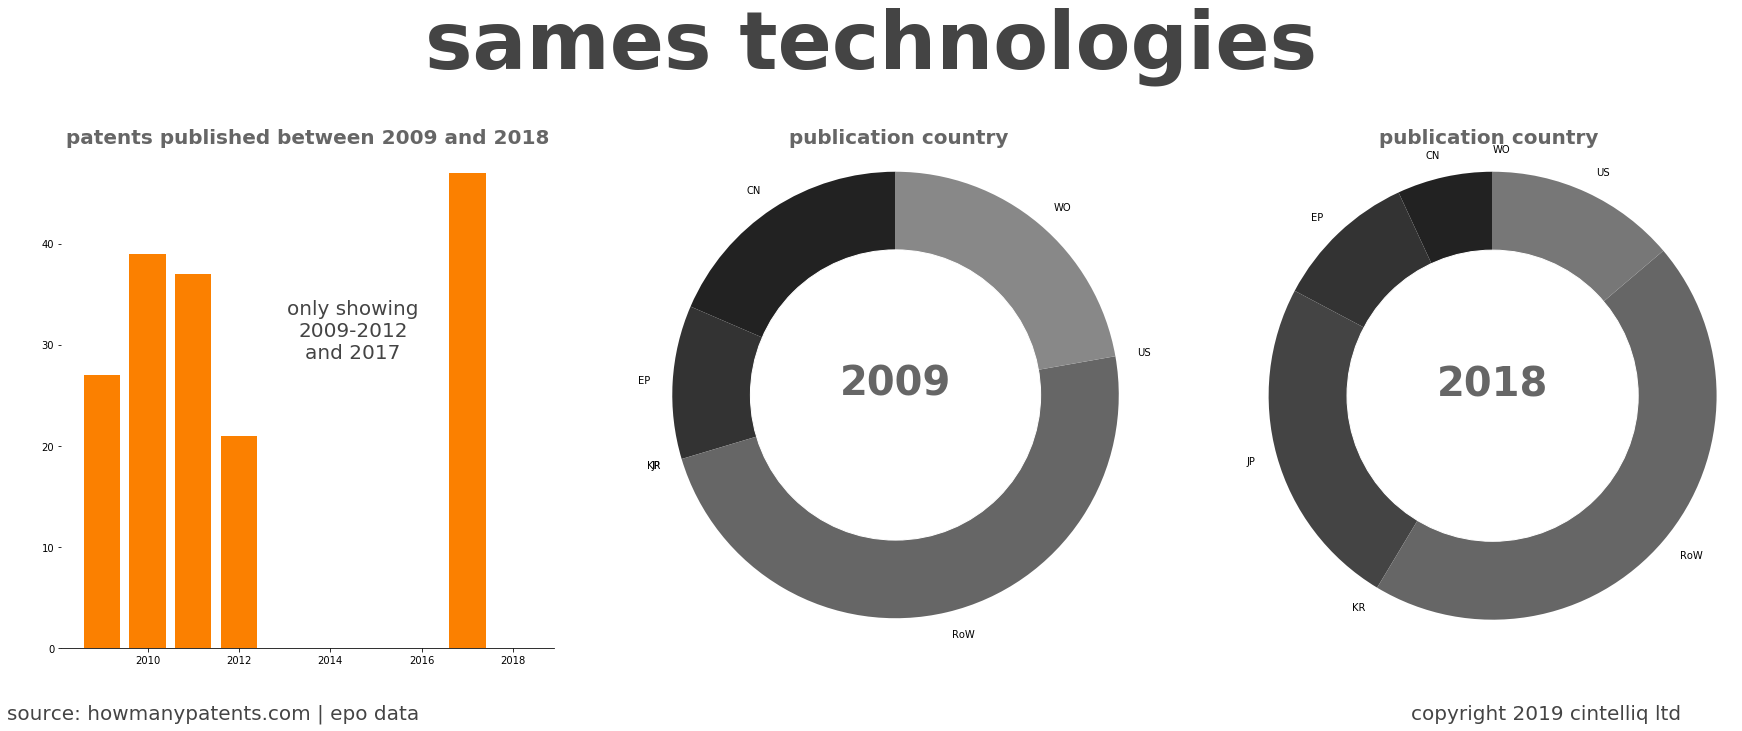 summary of patents for Sames Technologies